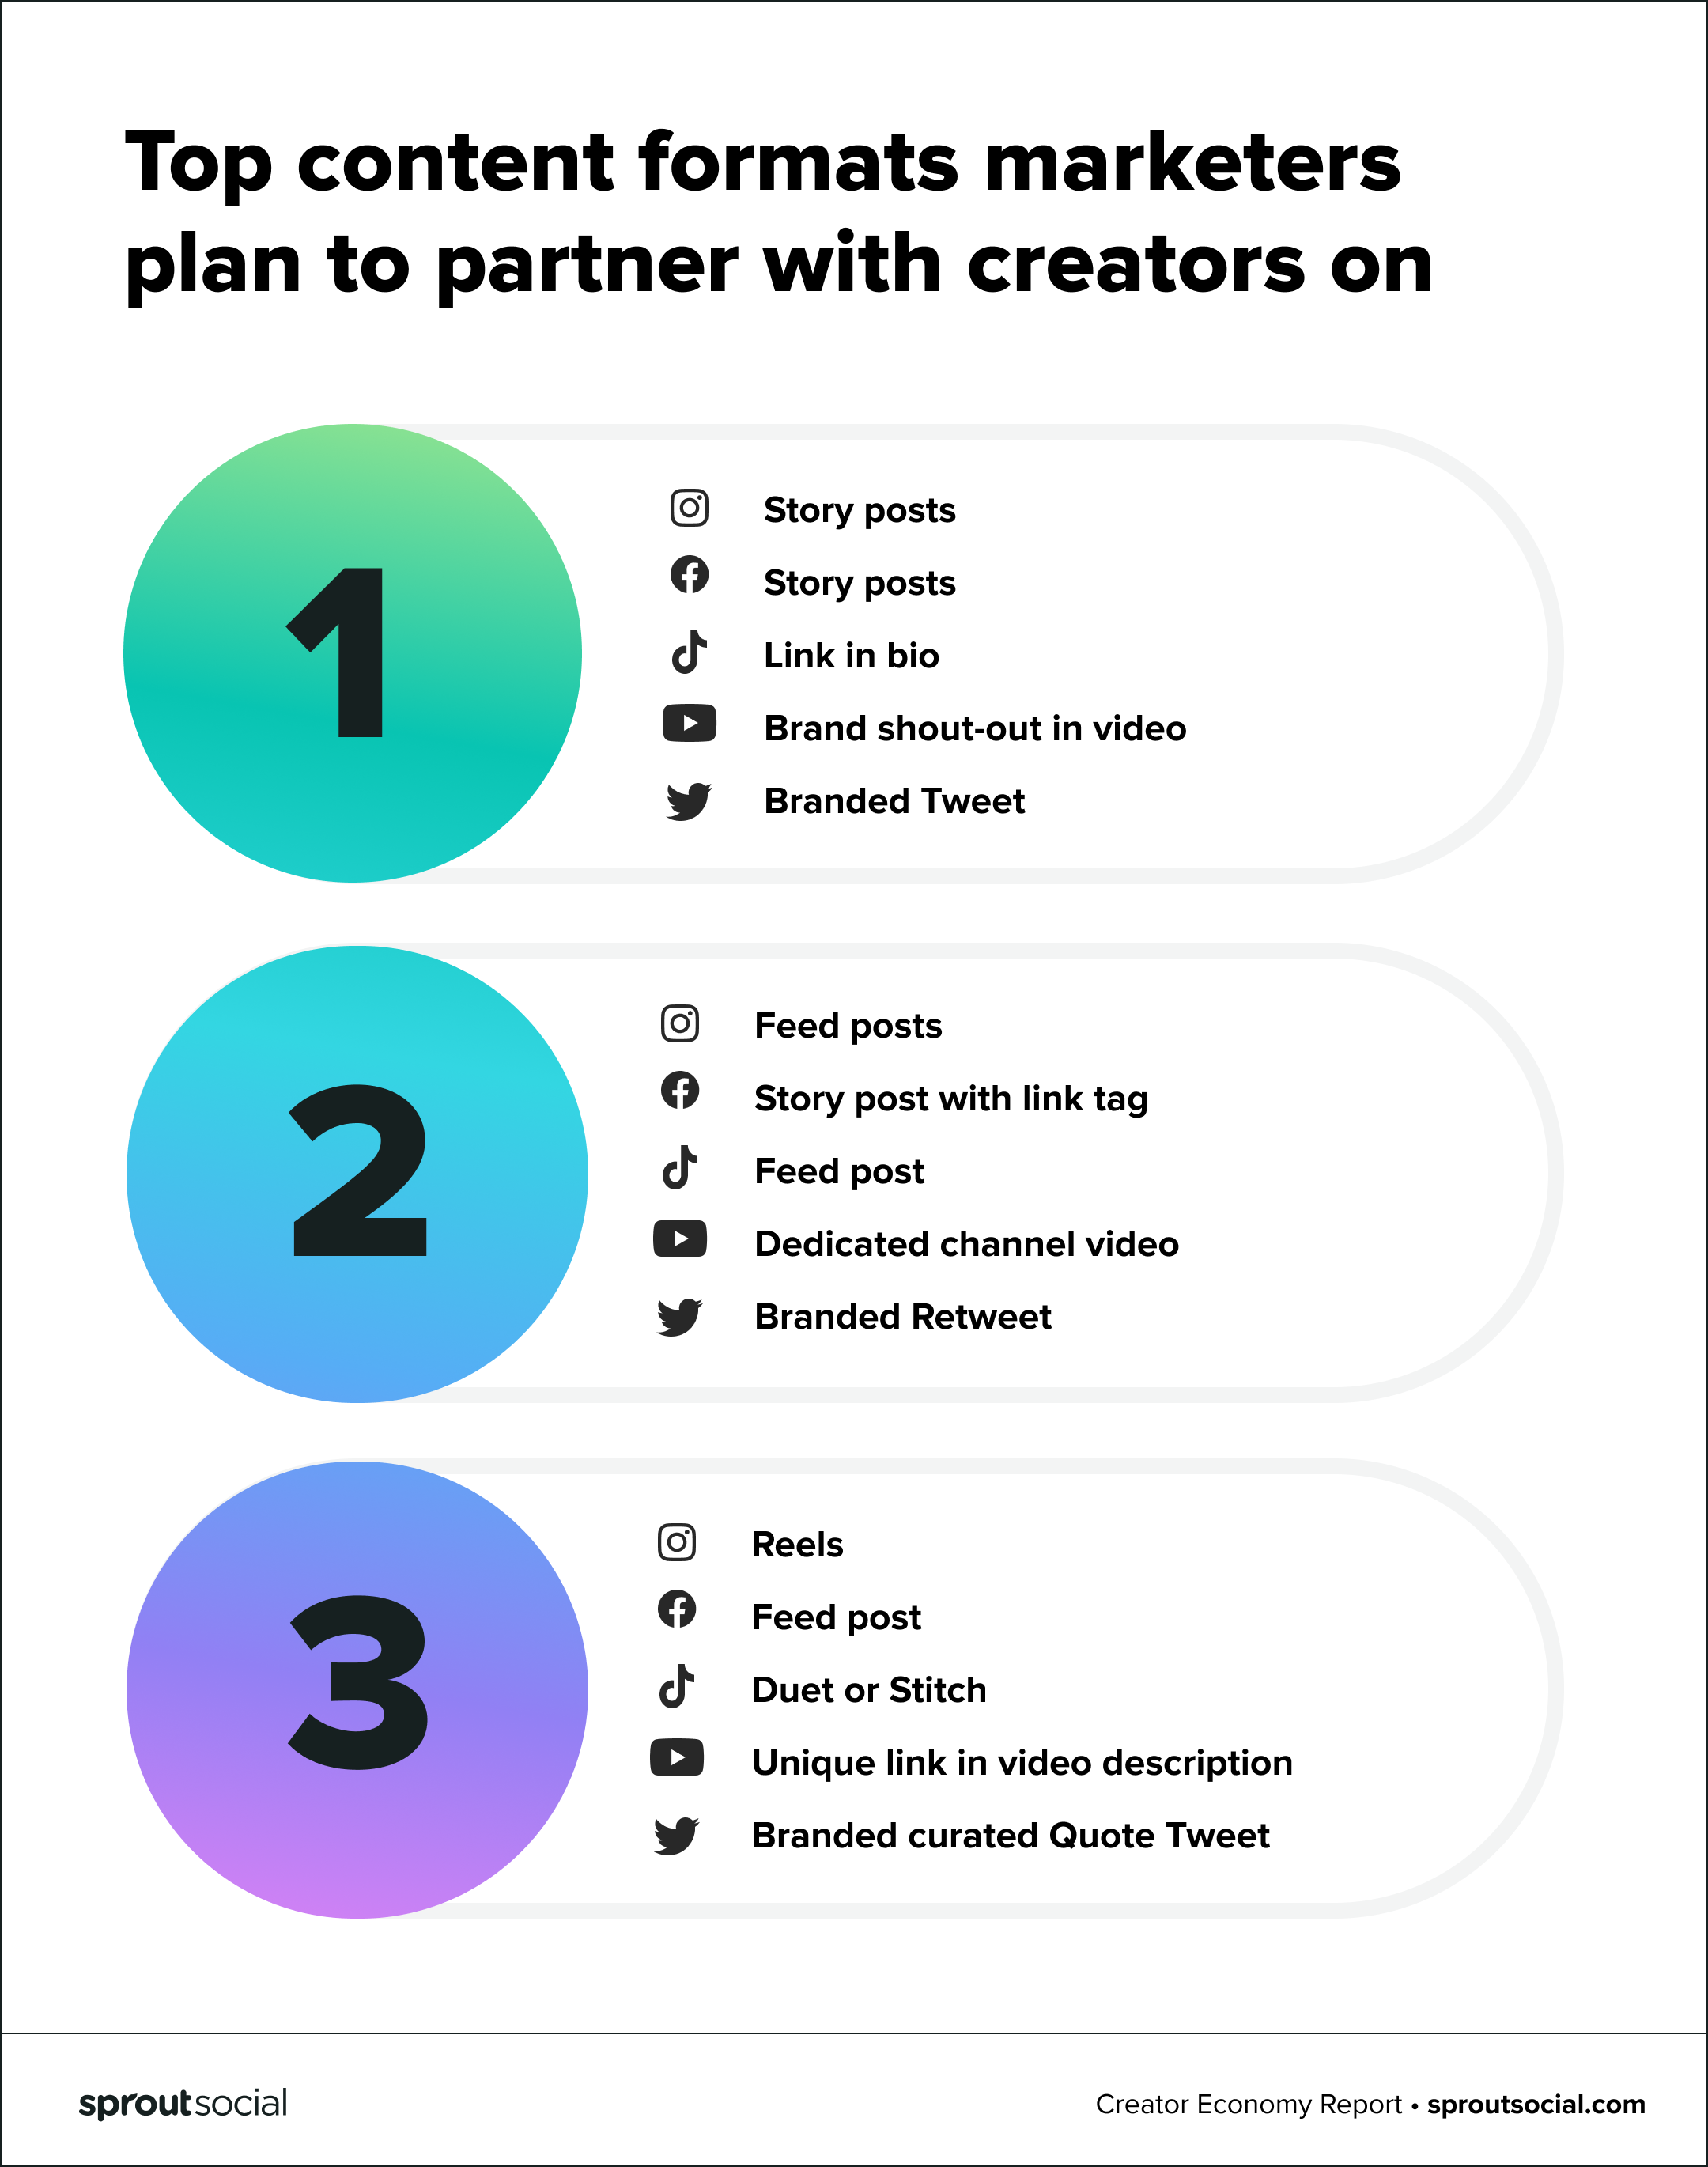 Graph of the top content formats marketers plan to partner with creators on, across platforms